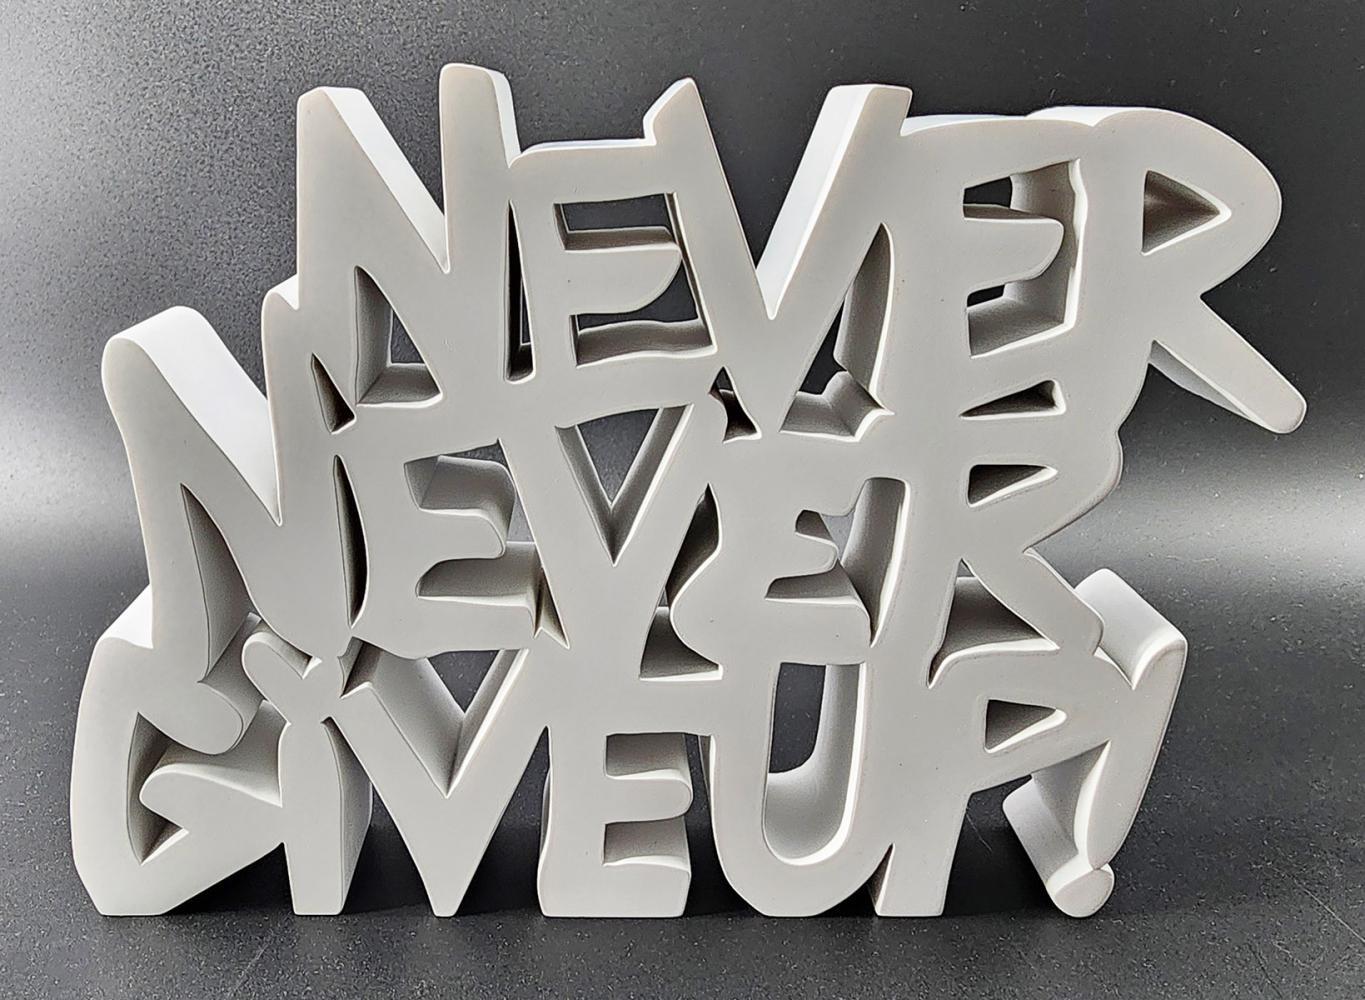 Artist: Mr. Brainwash
Title: Never Never Giveup - White
Medium: Painted Resin Edition Sculpture in padded box.
Size: 7.25 x 11 x 1.5 in.
Edition: 14/18
Signed, numbered, dated and thumb-printed by the artist.
Condition: In mint condition

For more